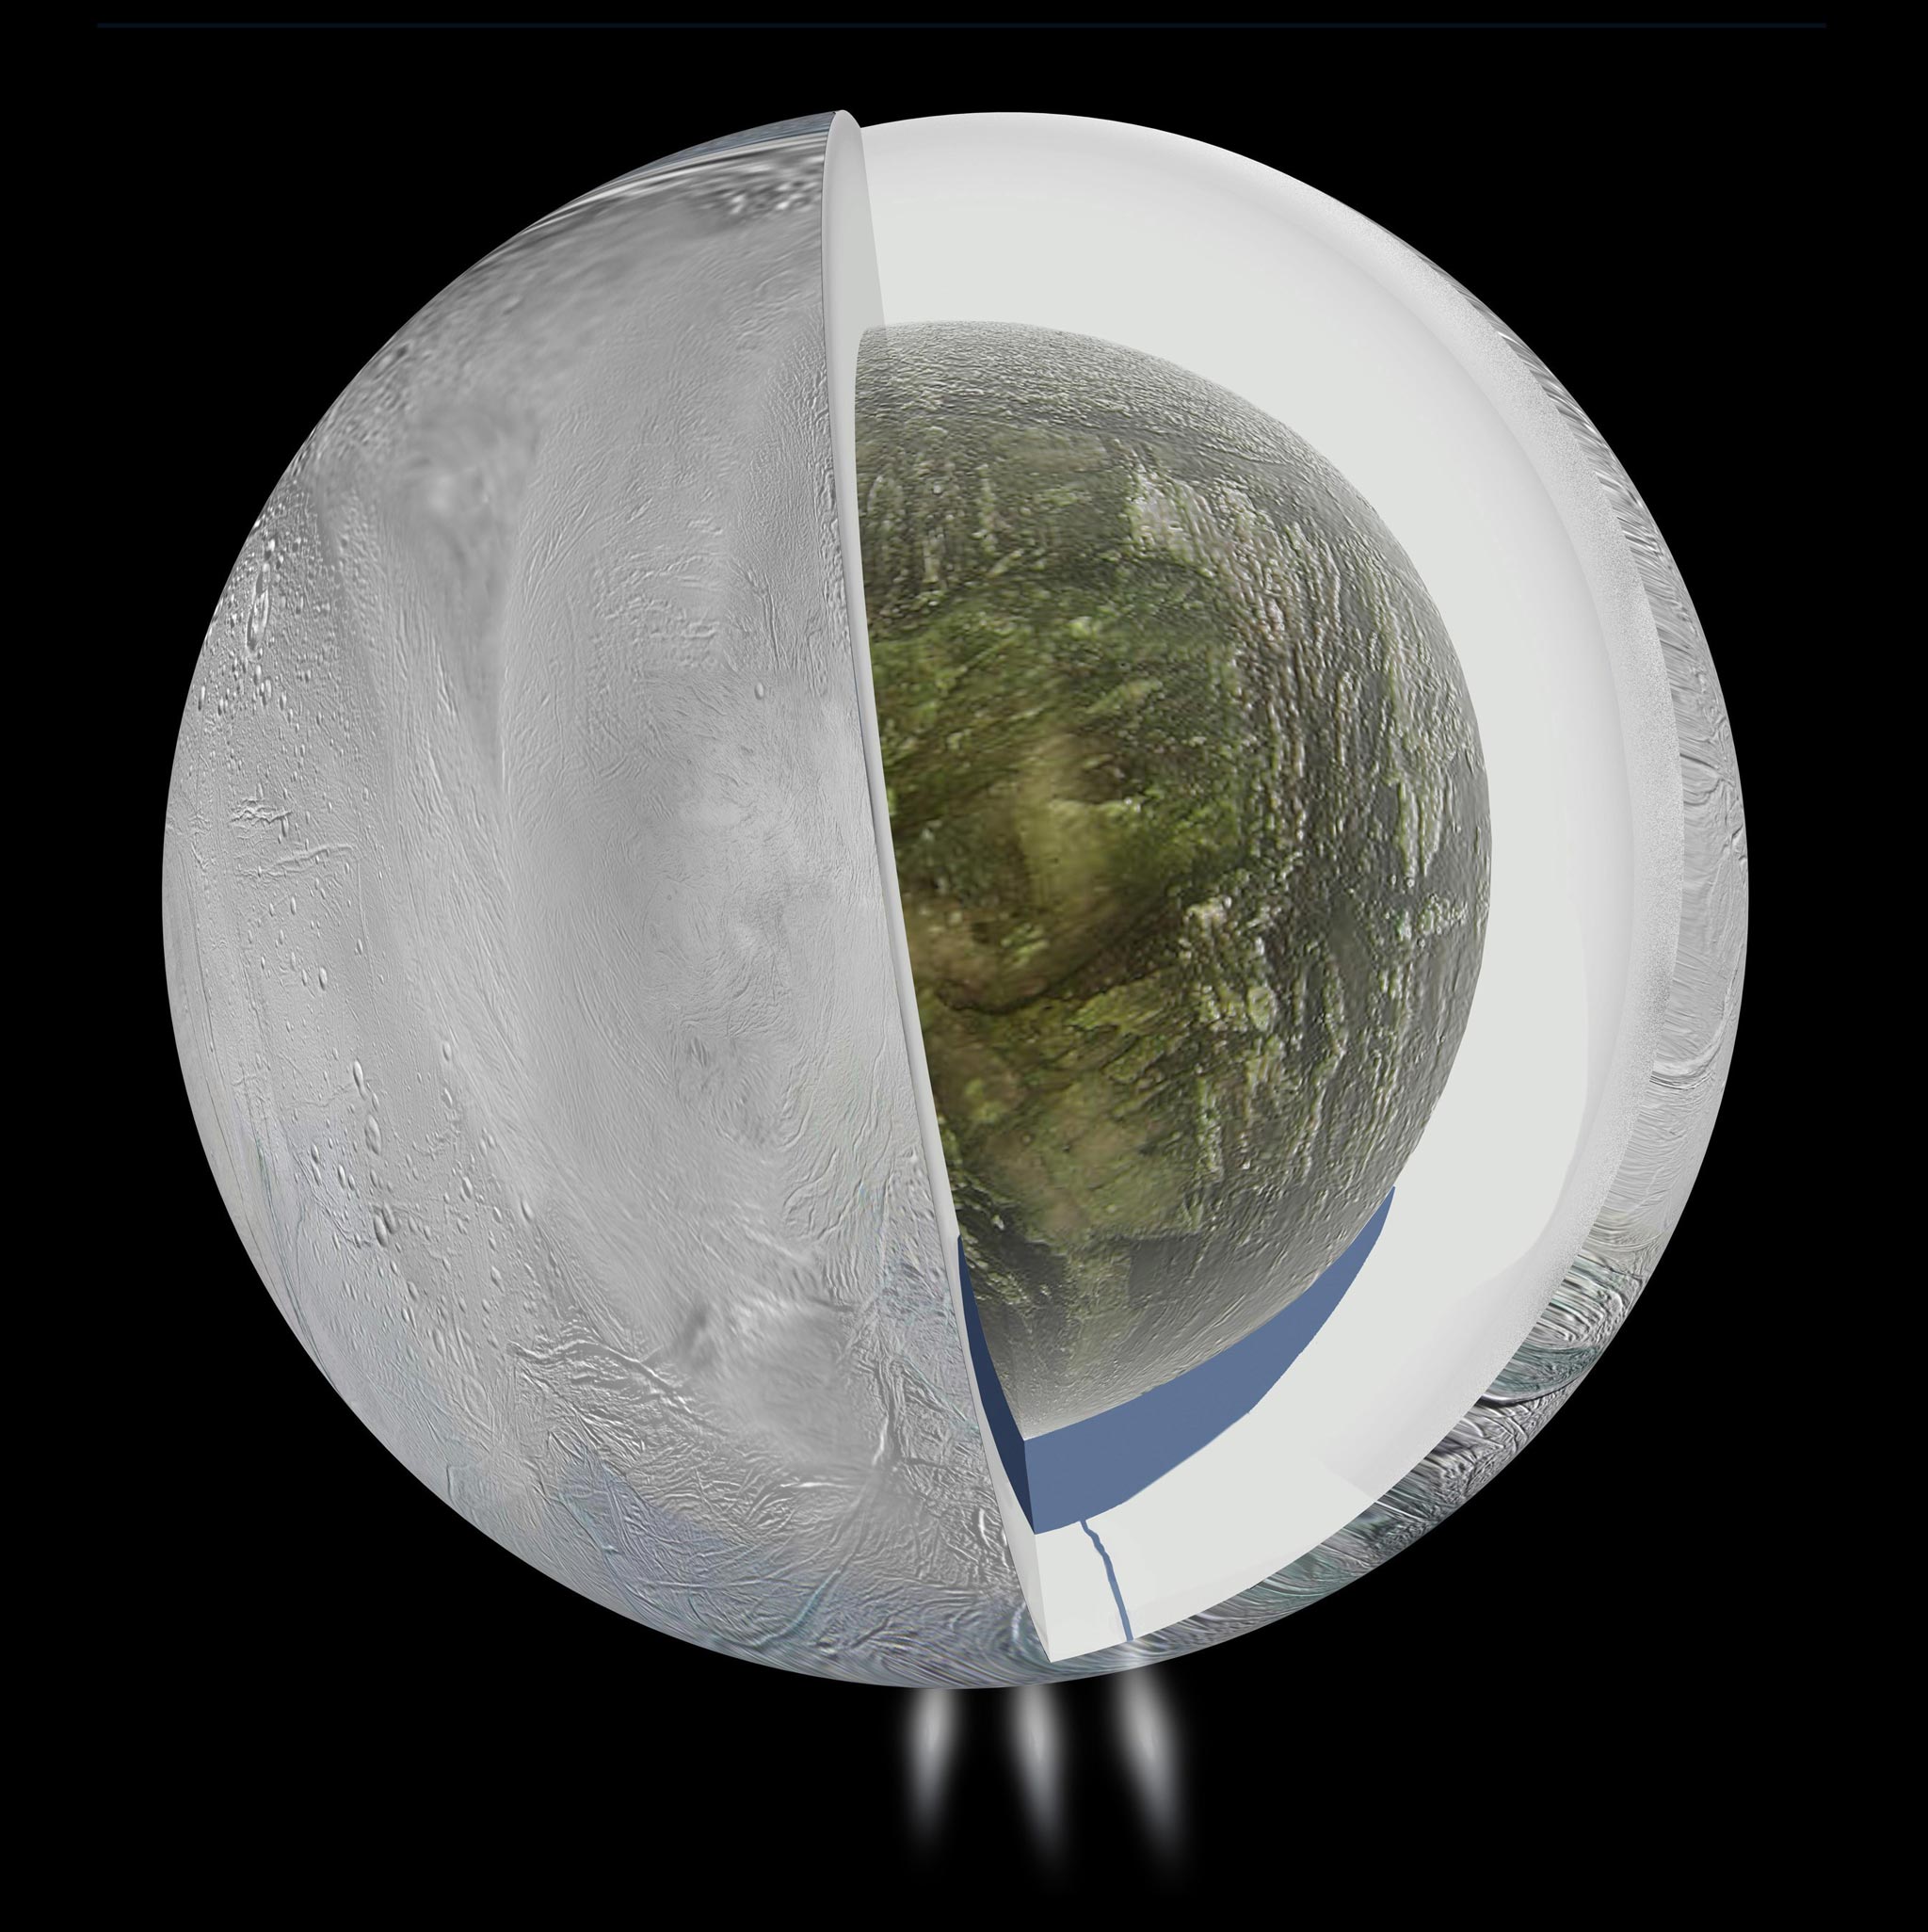 An illustration of the interior of Enceladus based on data from Cassini, which suggests an ice outer shell and a low density, rocky core with a regional water ocean sandwiched in between at high southern latitudes